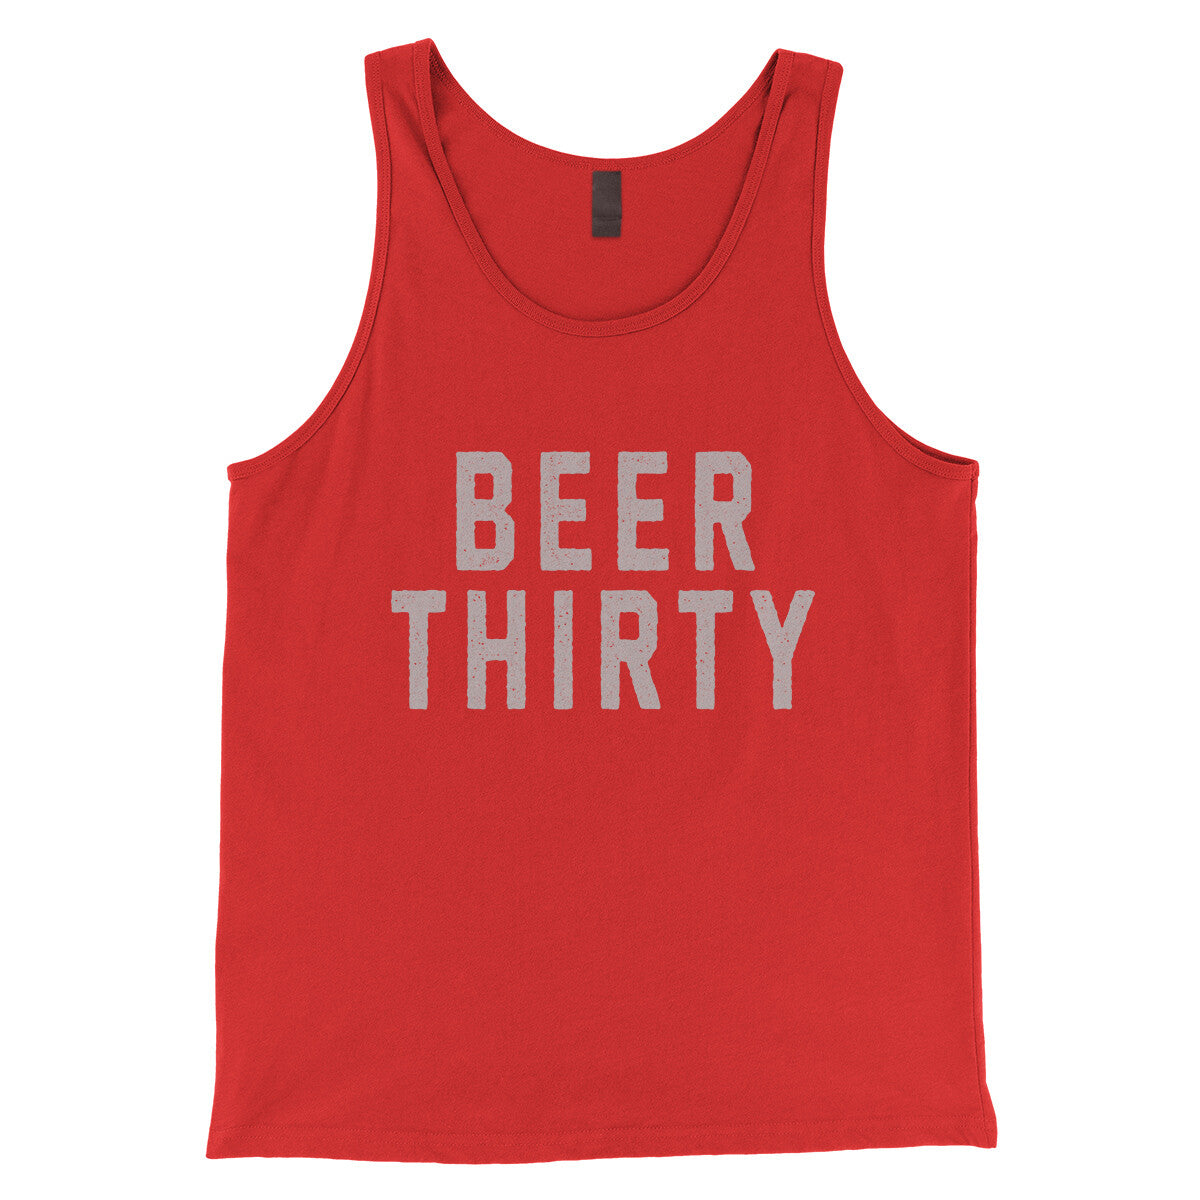 Beer Thirty in Red Color